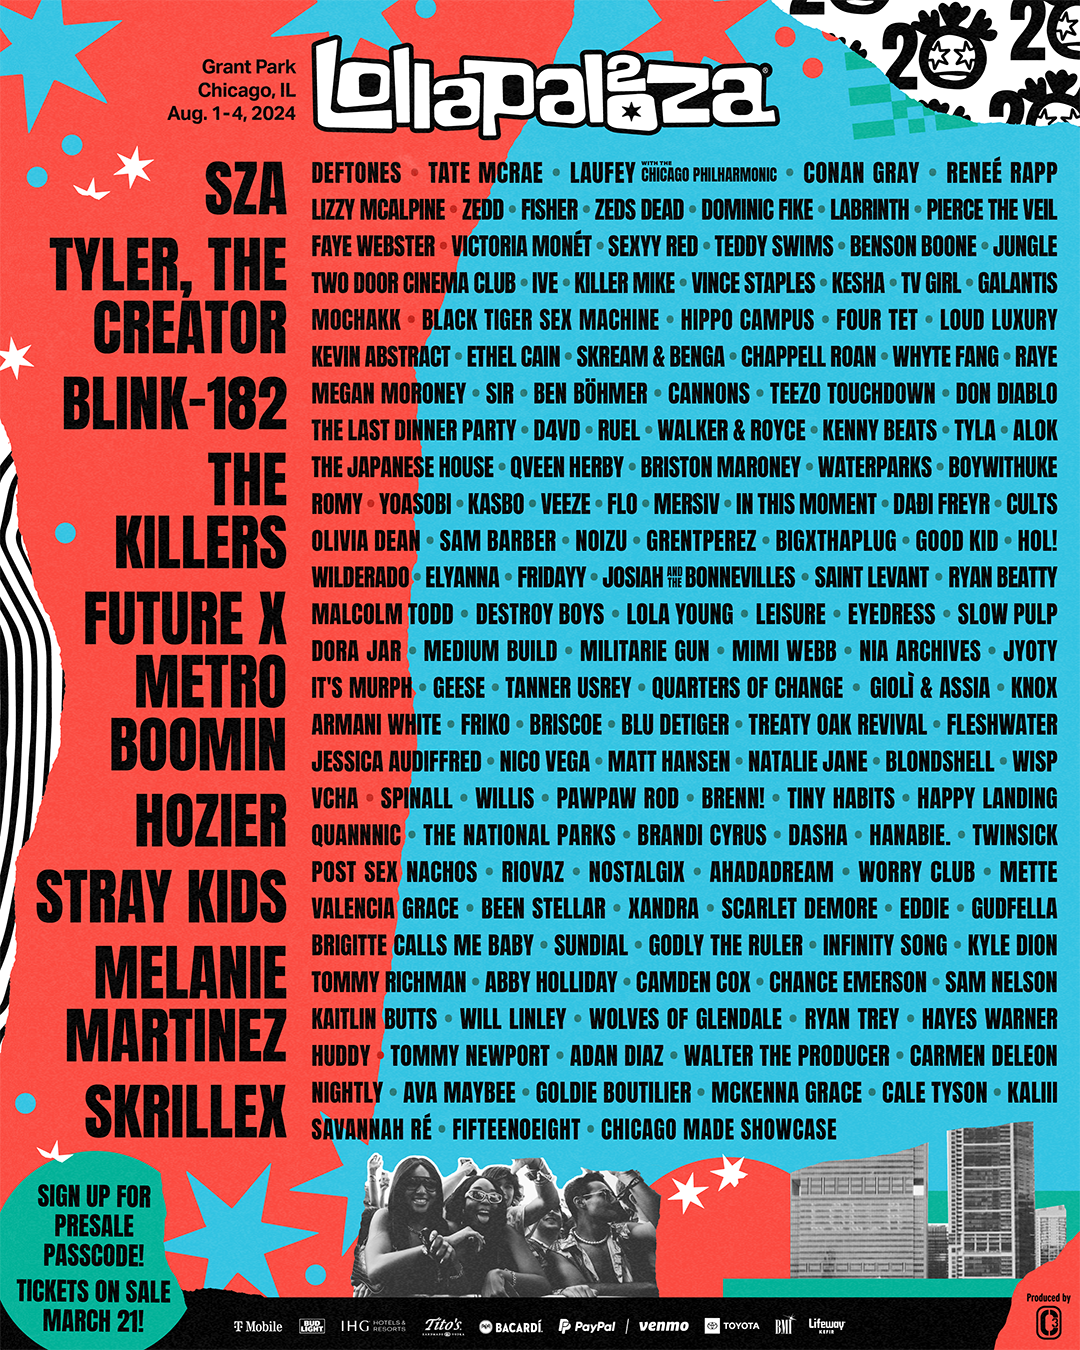 Lollapalooza 2024 Lineup: SZA, Tyler the Creator, Blink-182, The Killers, Future x Metro Boomin, Hozier, Stray Kids, Melanie Martinez, Skrillex, Deftness, Tate McRae, Laufey with the Chicago Philharmonic, Conan Gray, Renee Rapp, and more